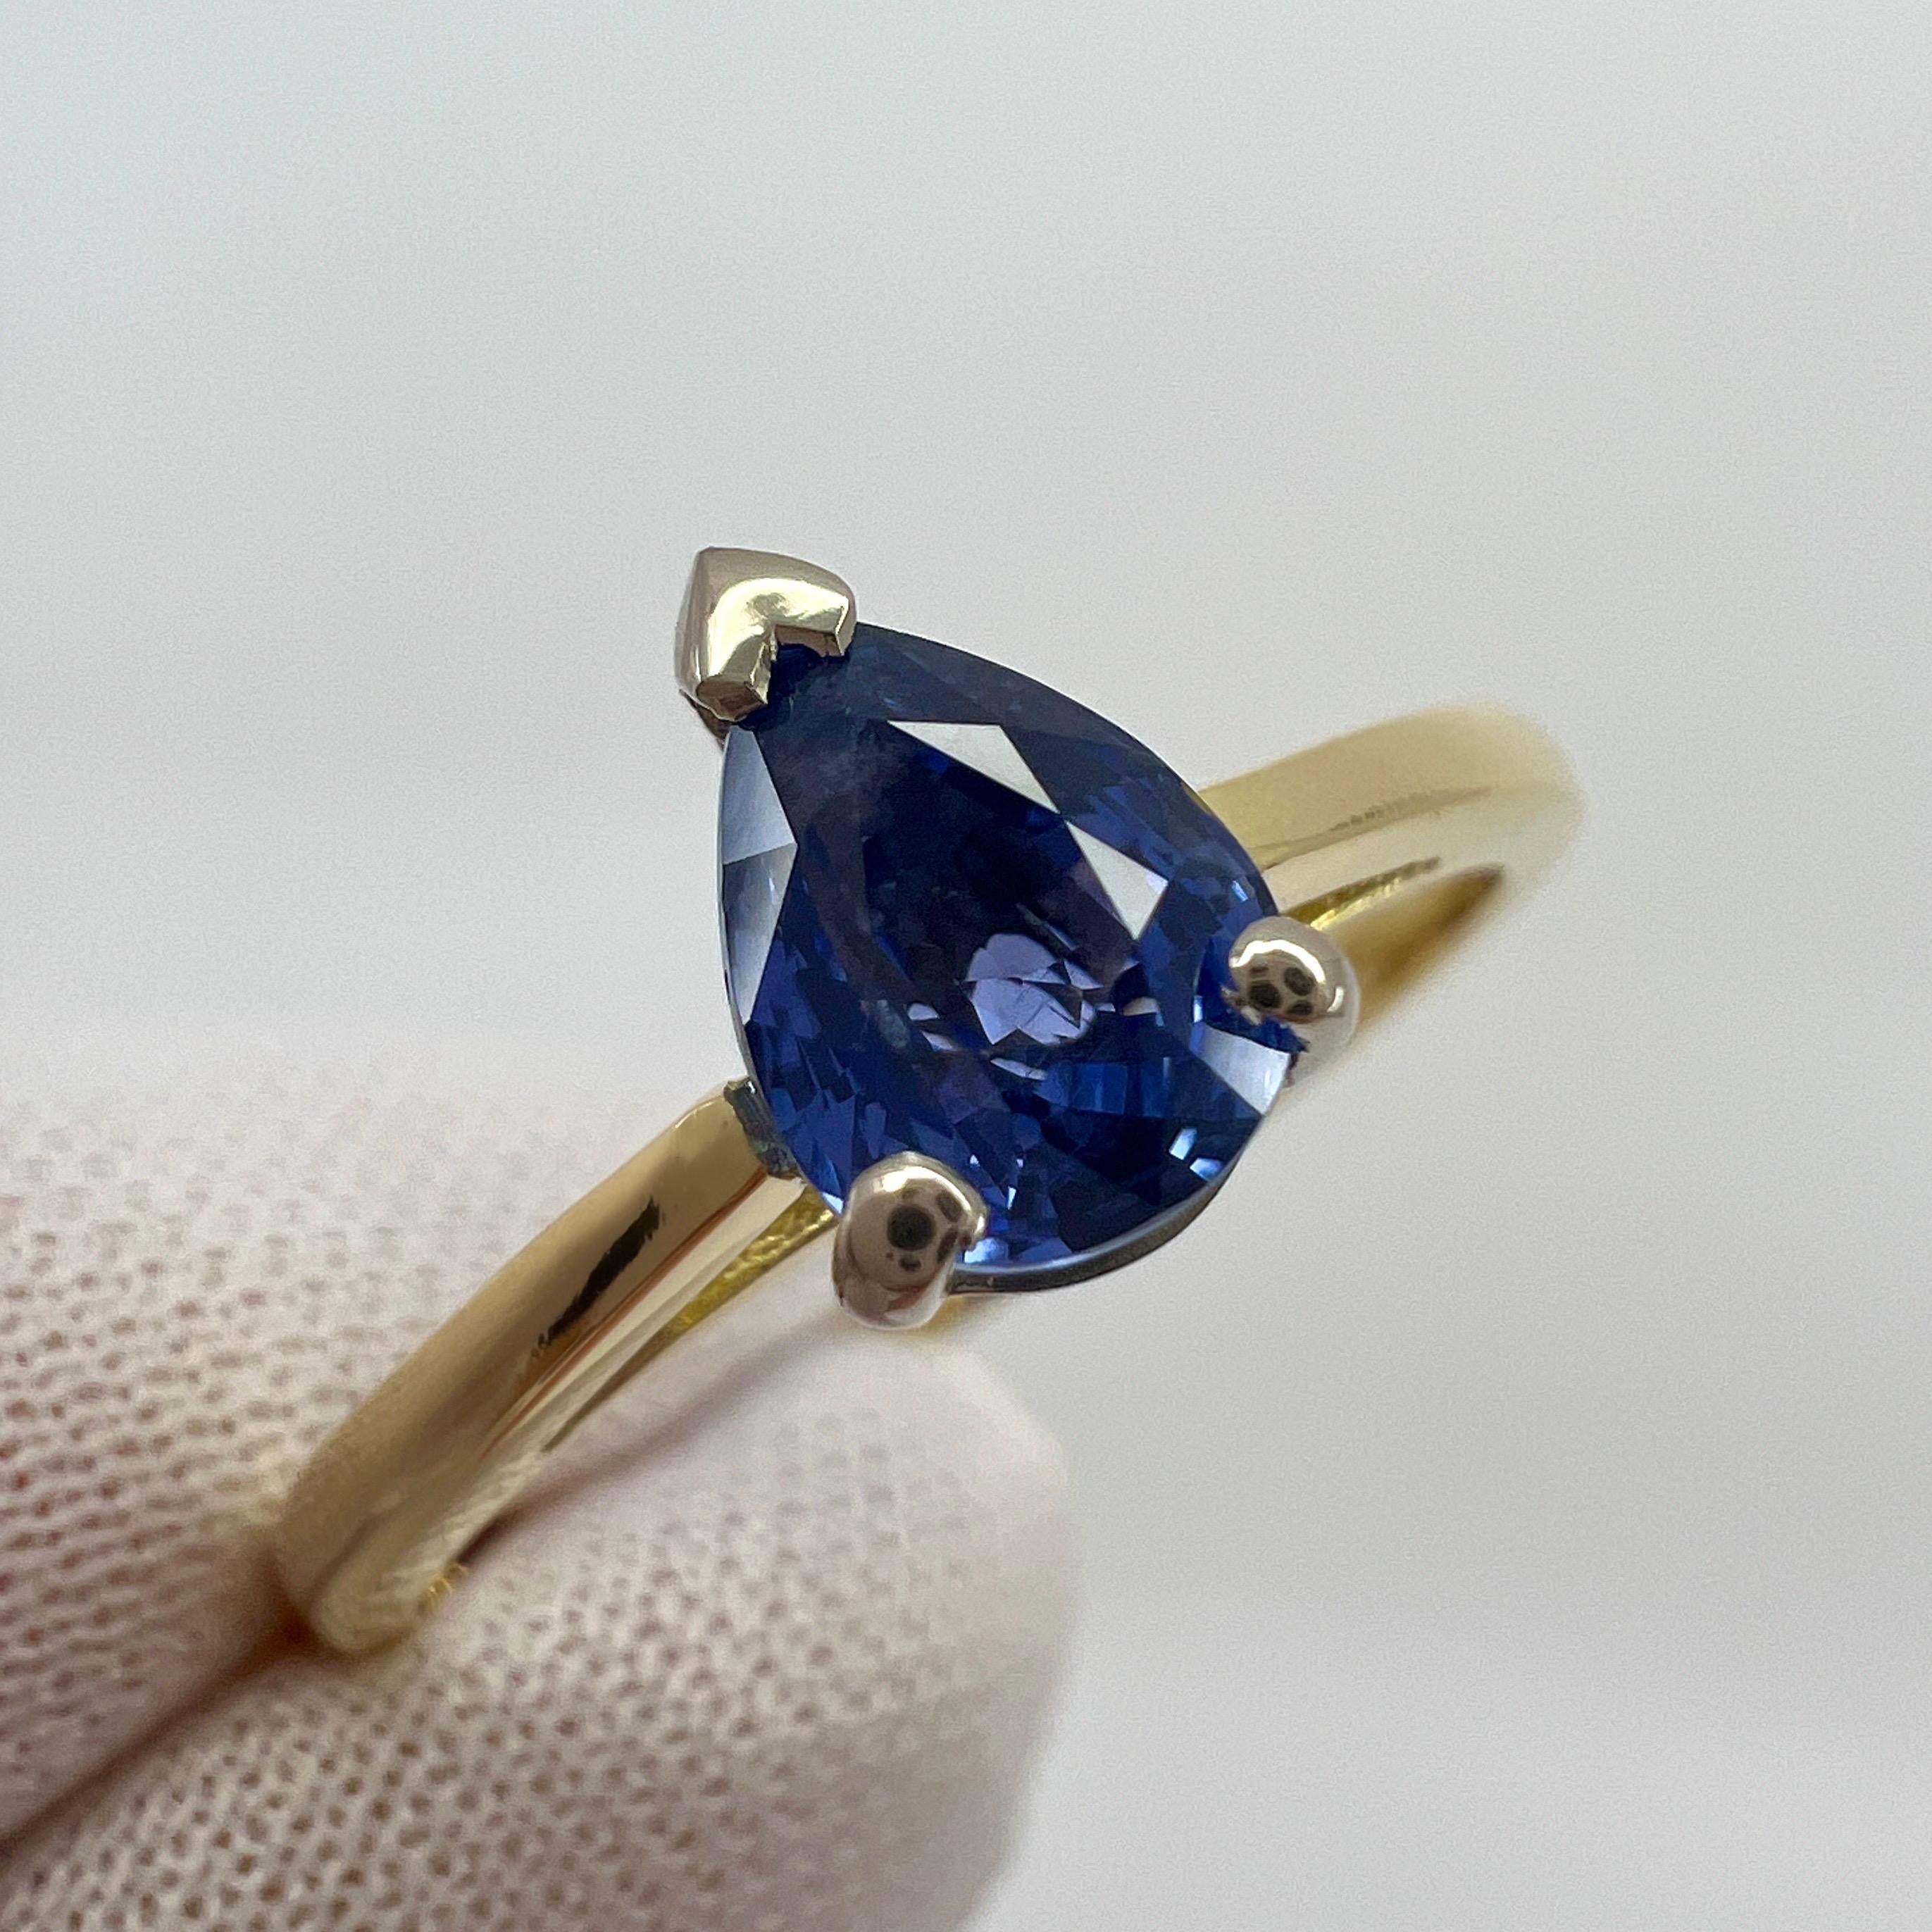 Vivid Blue Ceylon Sapphire Pear Cut 18k Yellow & White Gold Solitaire Ring.

1.04 Carat sapphire with a stunning vivid blue colour and good clarity. Clean stone with only some small natural inclusions visible when looking closely.

Also has a very